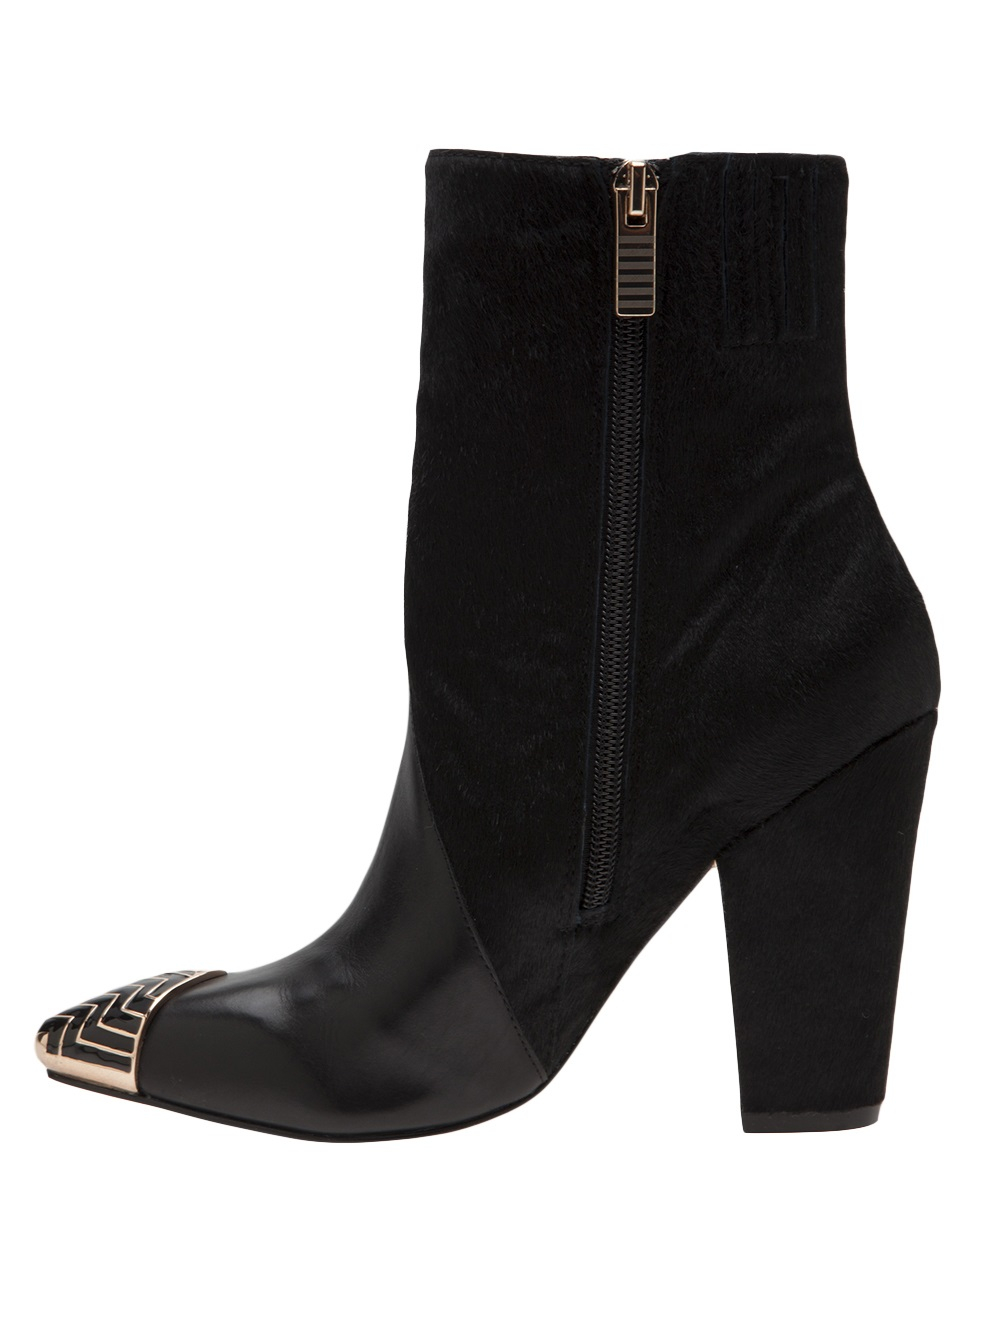 Lyst - Ivy Kirzhner Cade Tall Ankle Boot in Black